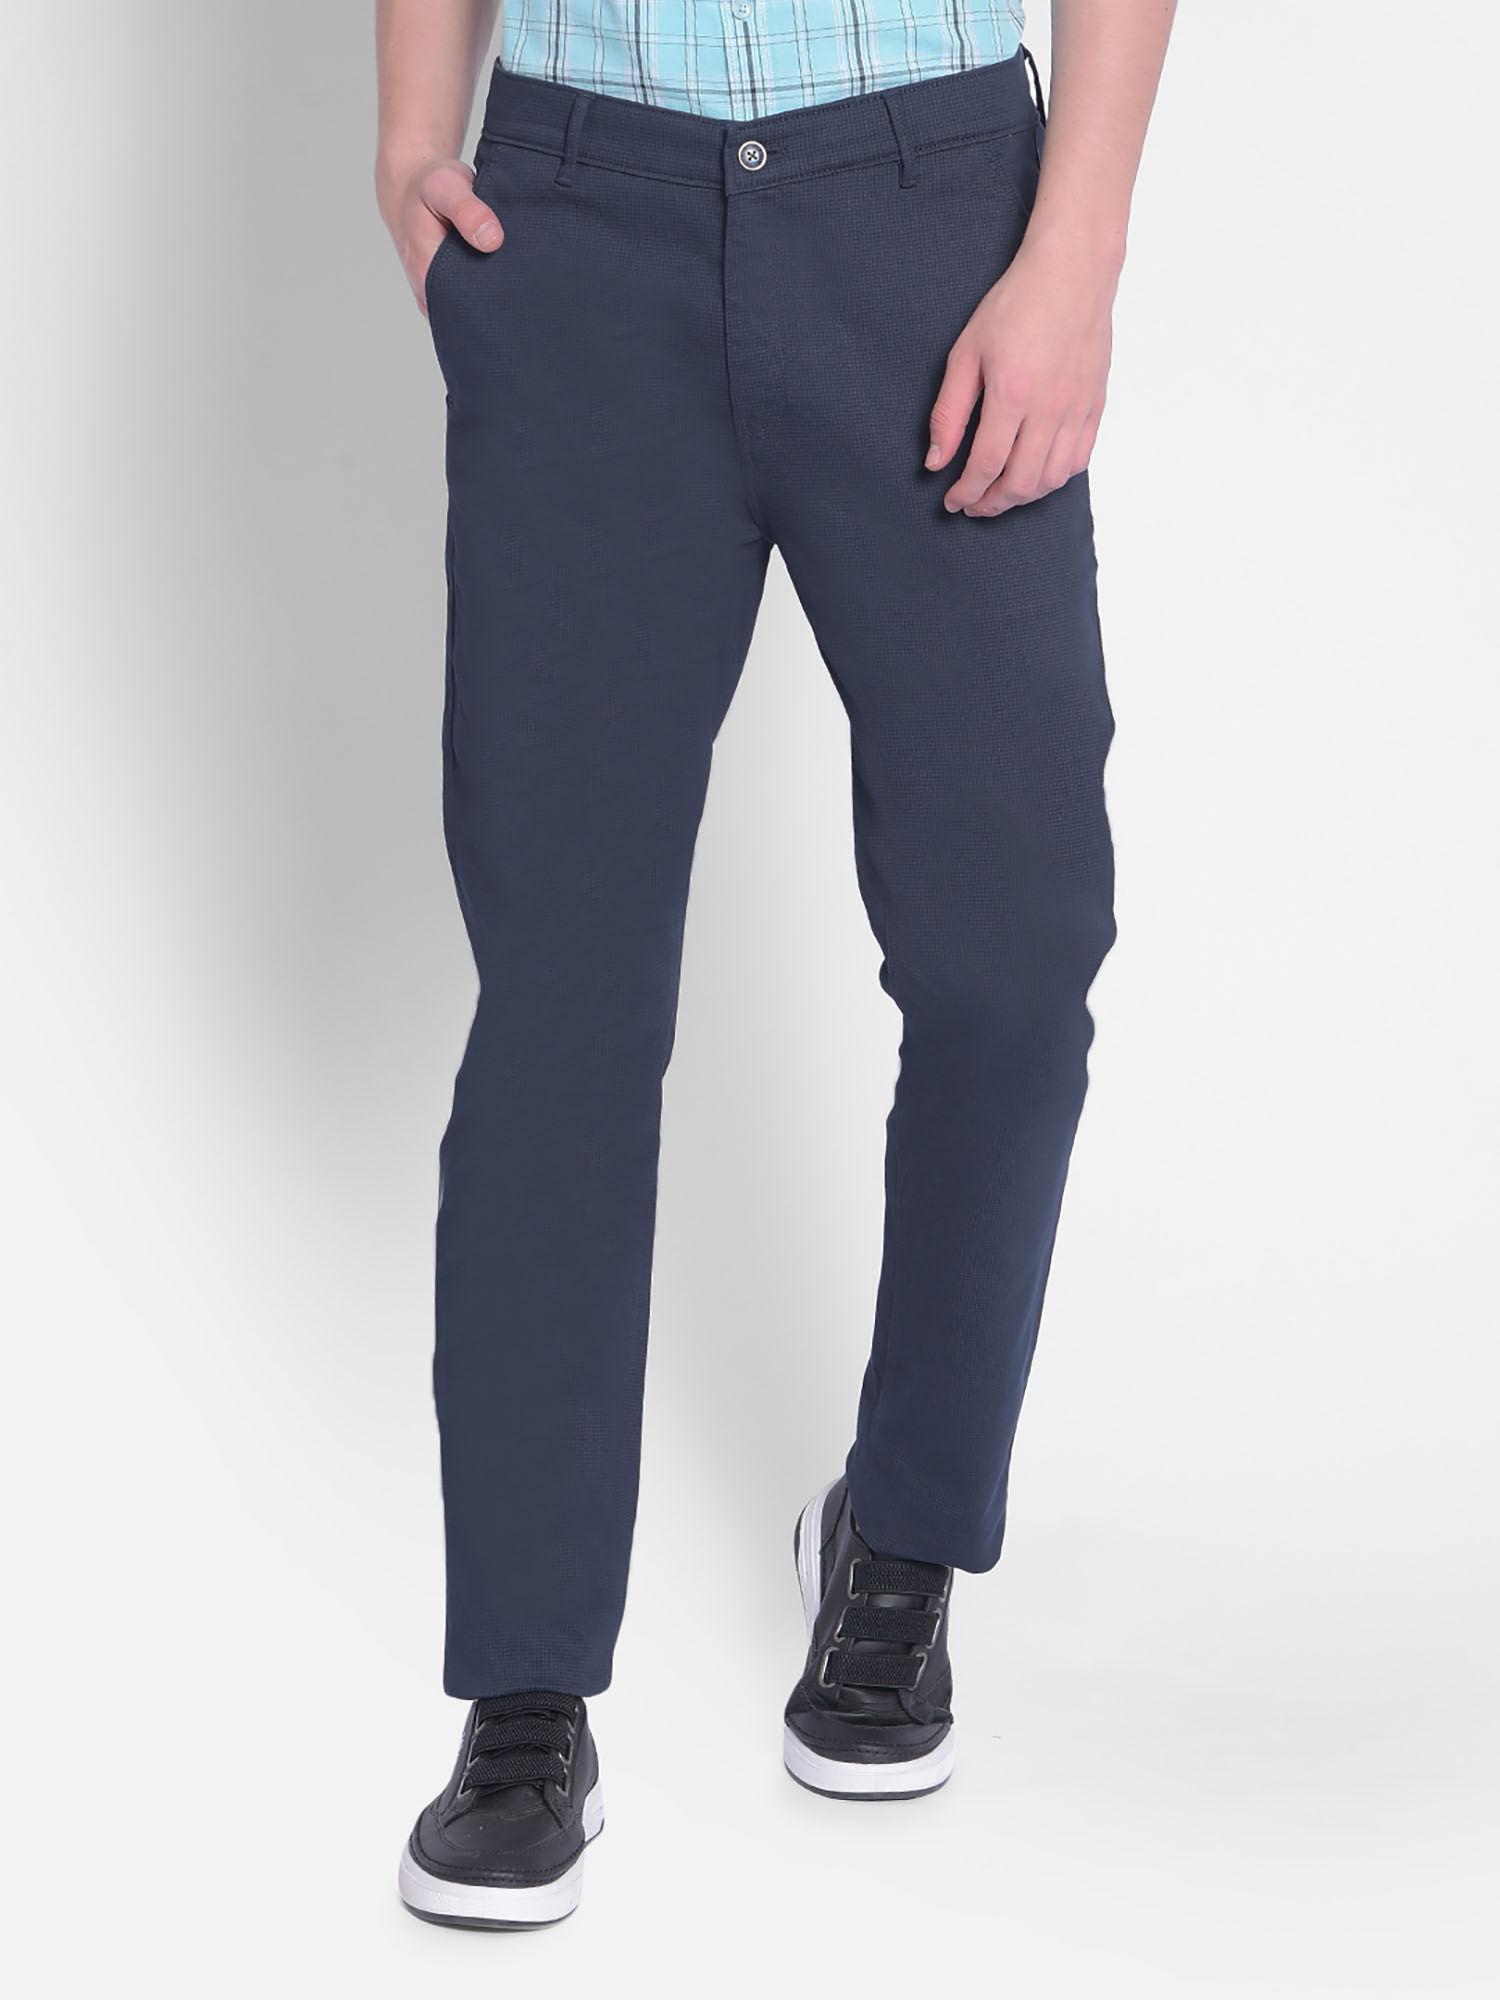 mens navy blue checked trousers